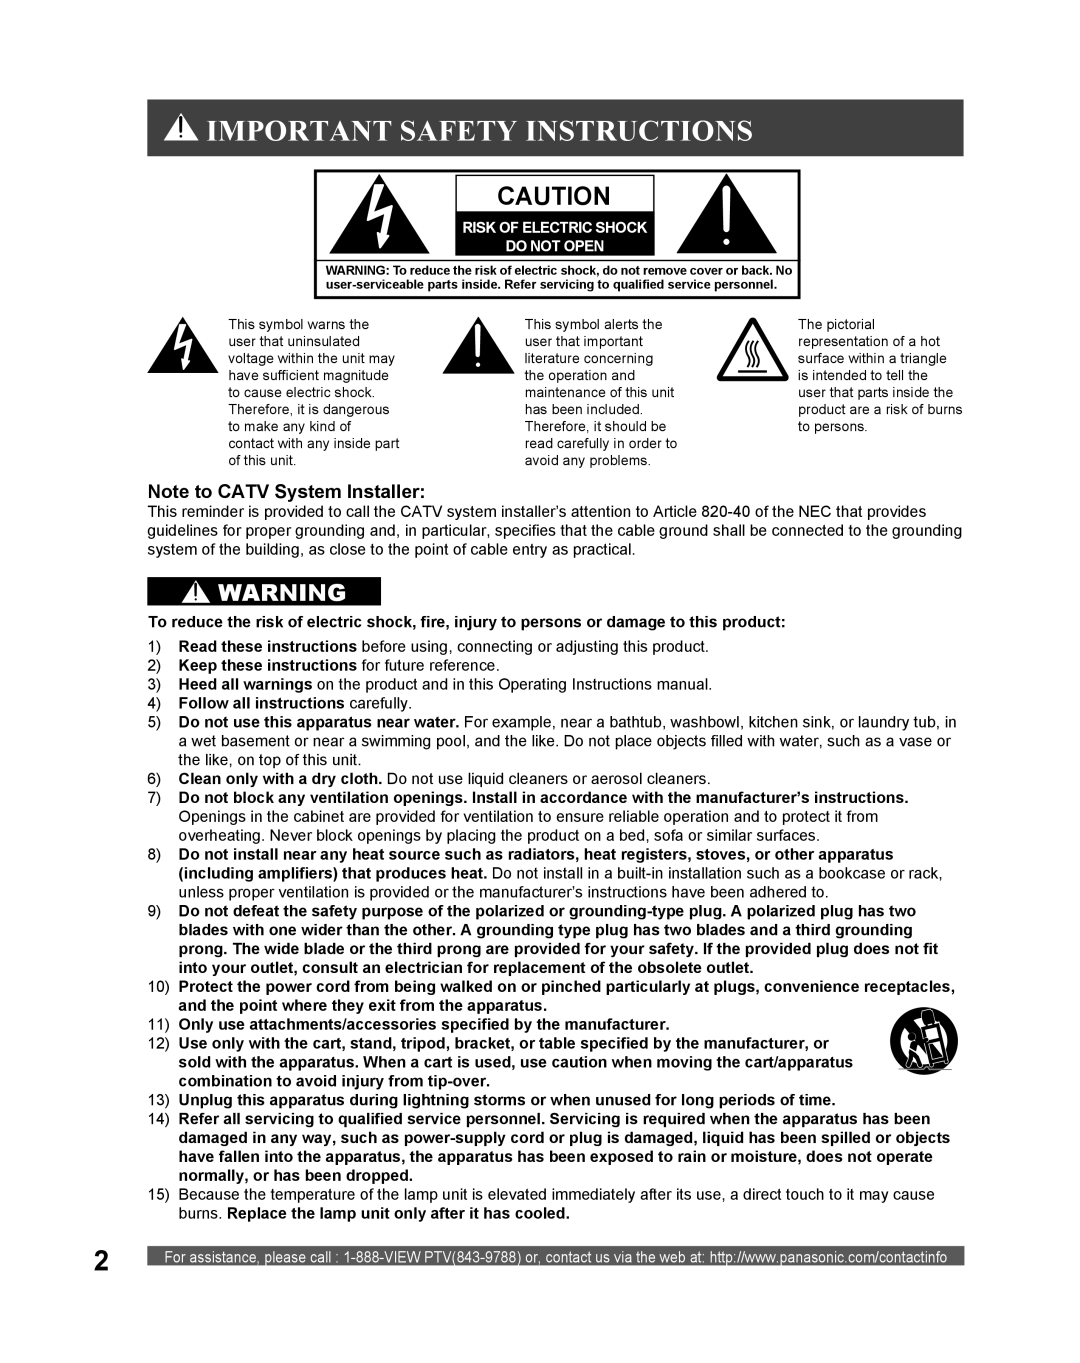 Panasonic PT-56LCX16 Important Safety Instructions, Note to CATV System Installer, Risk Of Electric Shock Do Not Open 